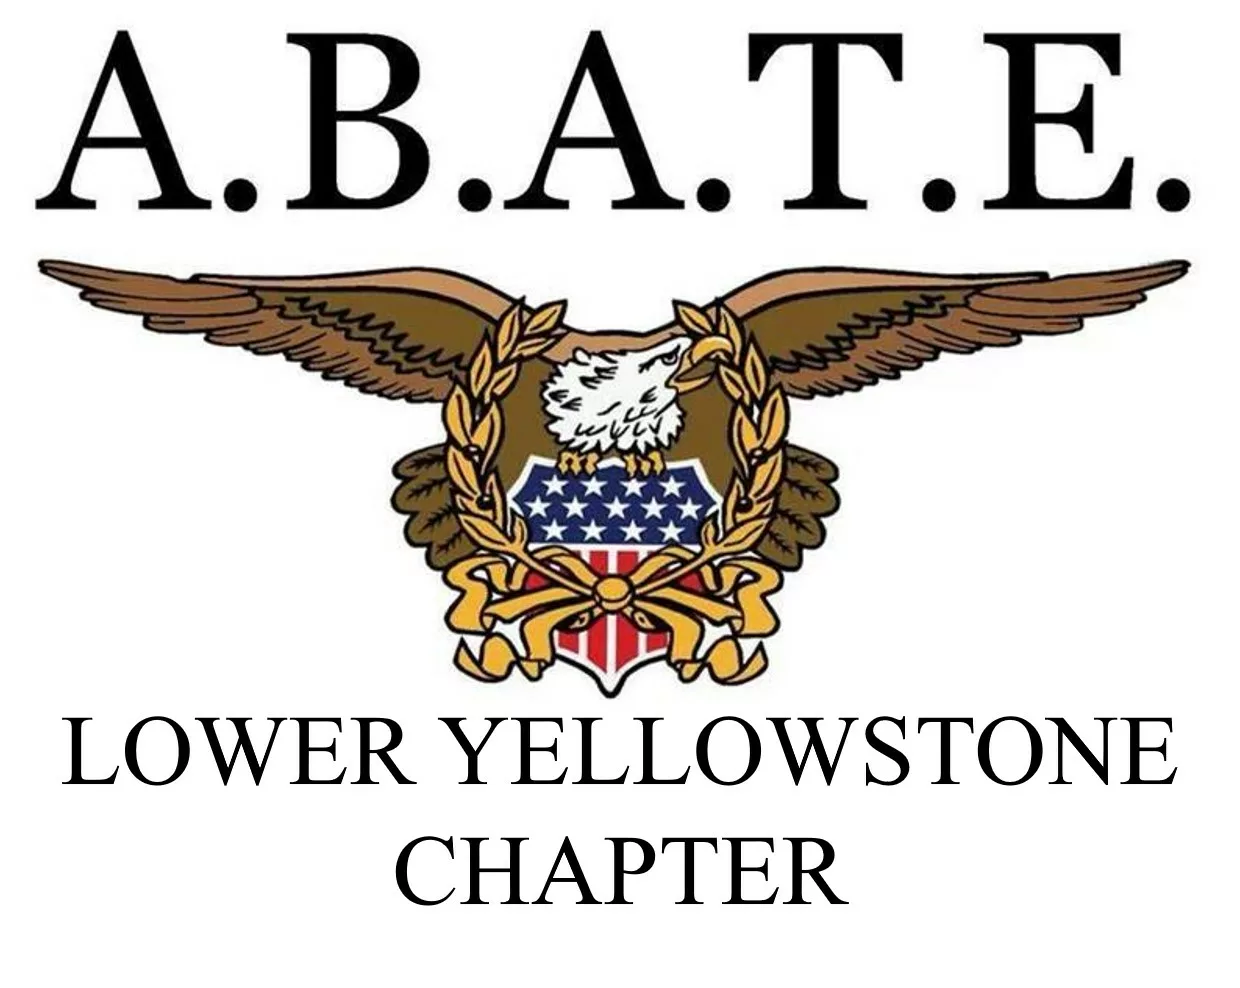 ABATE Lower Yellowstone Chapter (TEAL)